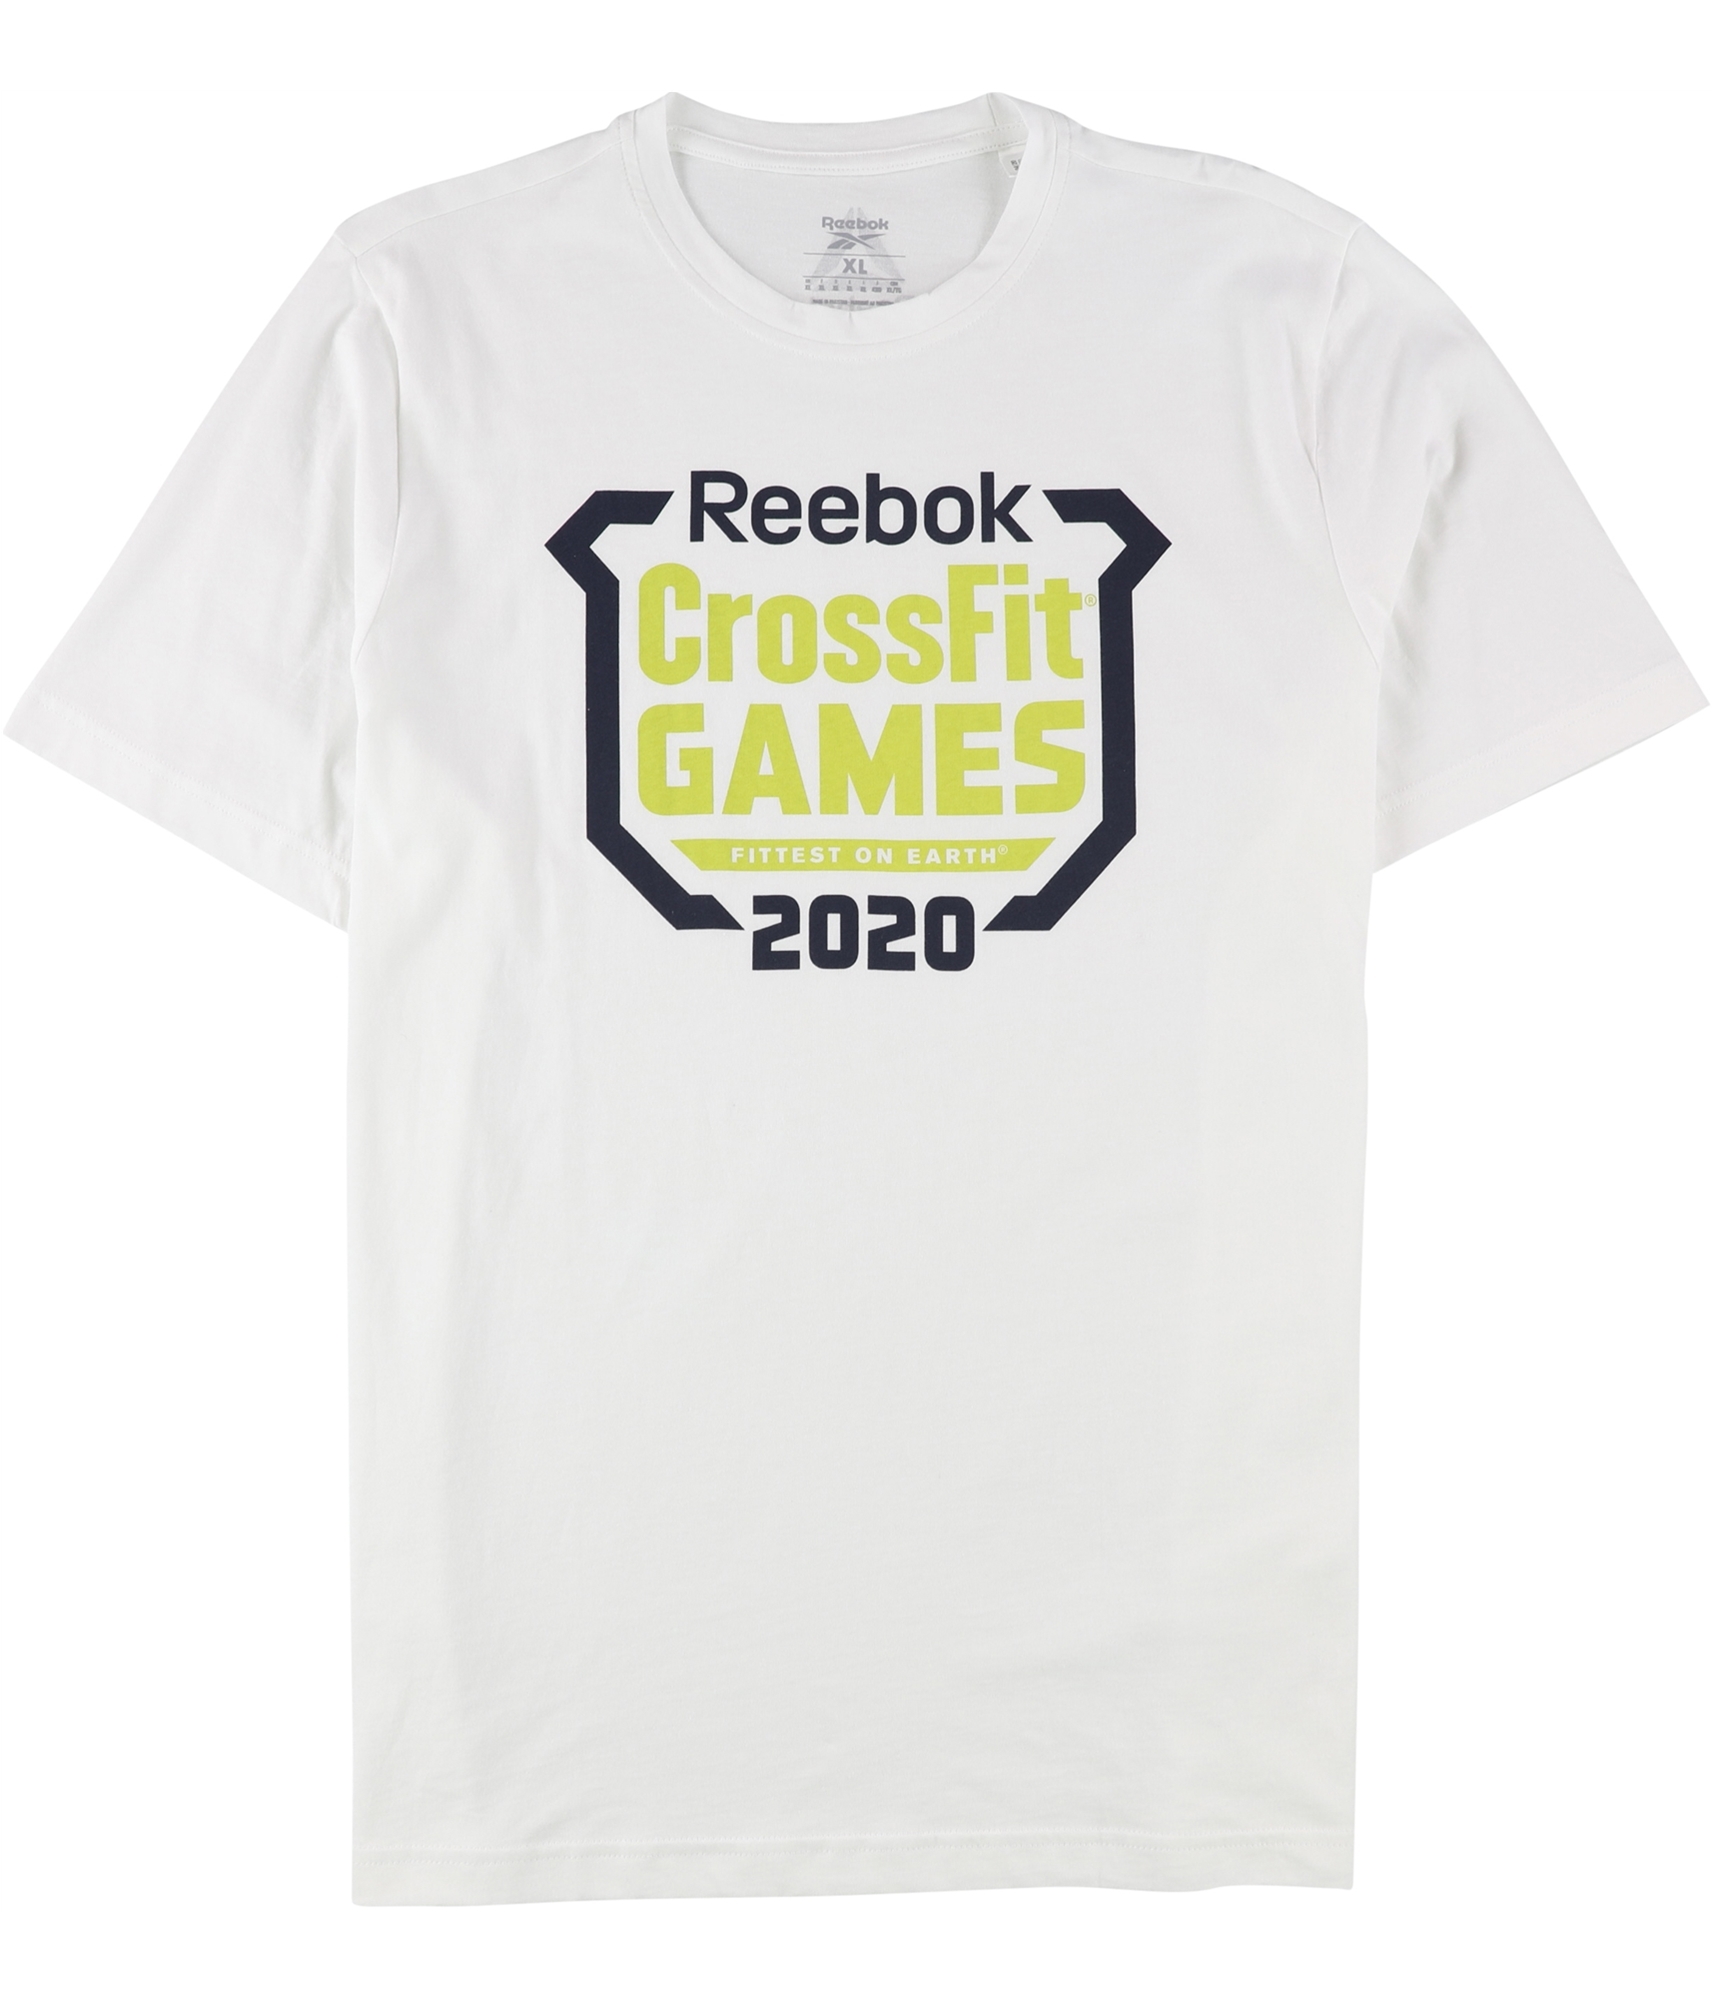 a Mens Reebok Crossfit Games Fittest On Earth 2020 Graphic Online TagsWeekly.com